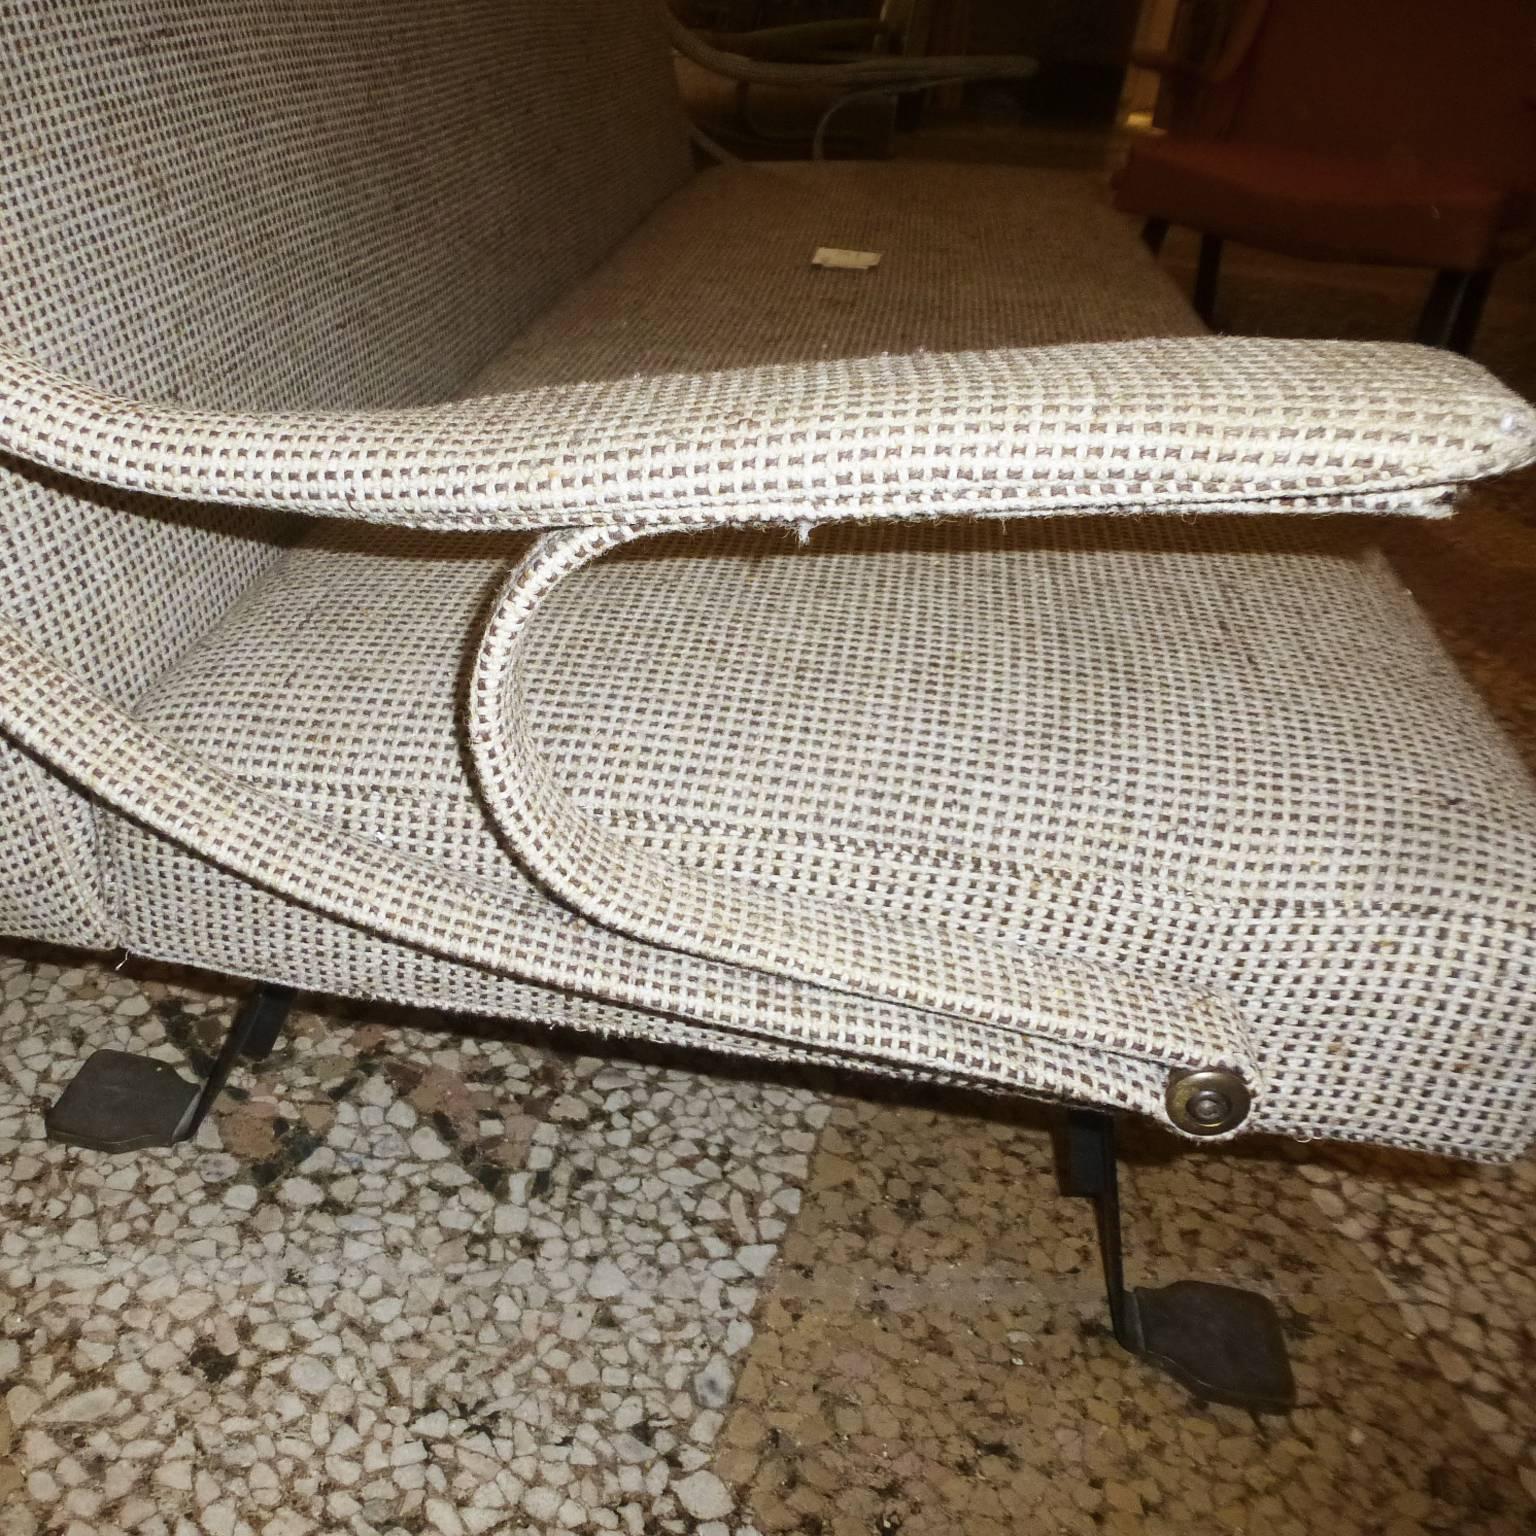 Diganna sofa by Ignazio Gardella produced by Azucena, Italy, 1950. 

Full steel enamel frame, with rubber padding on elastic straps, fabric covering and brass details.